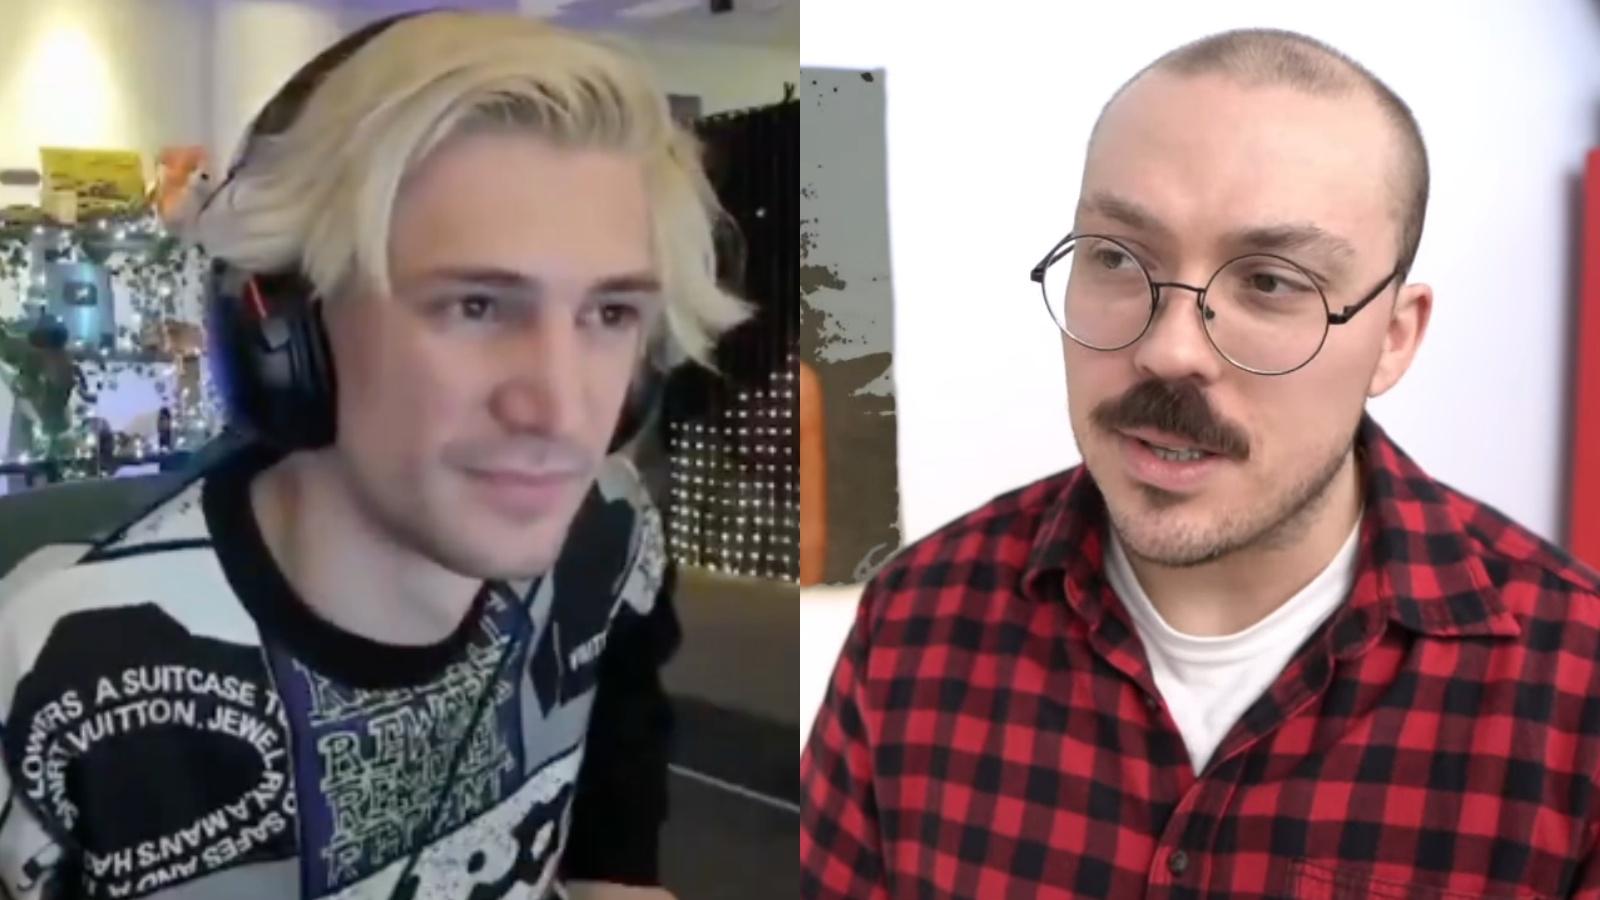 xQc and Anthony Fantano in a side-by-side photo